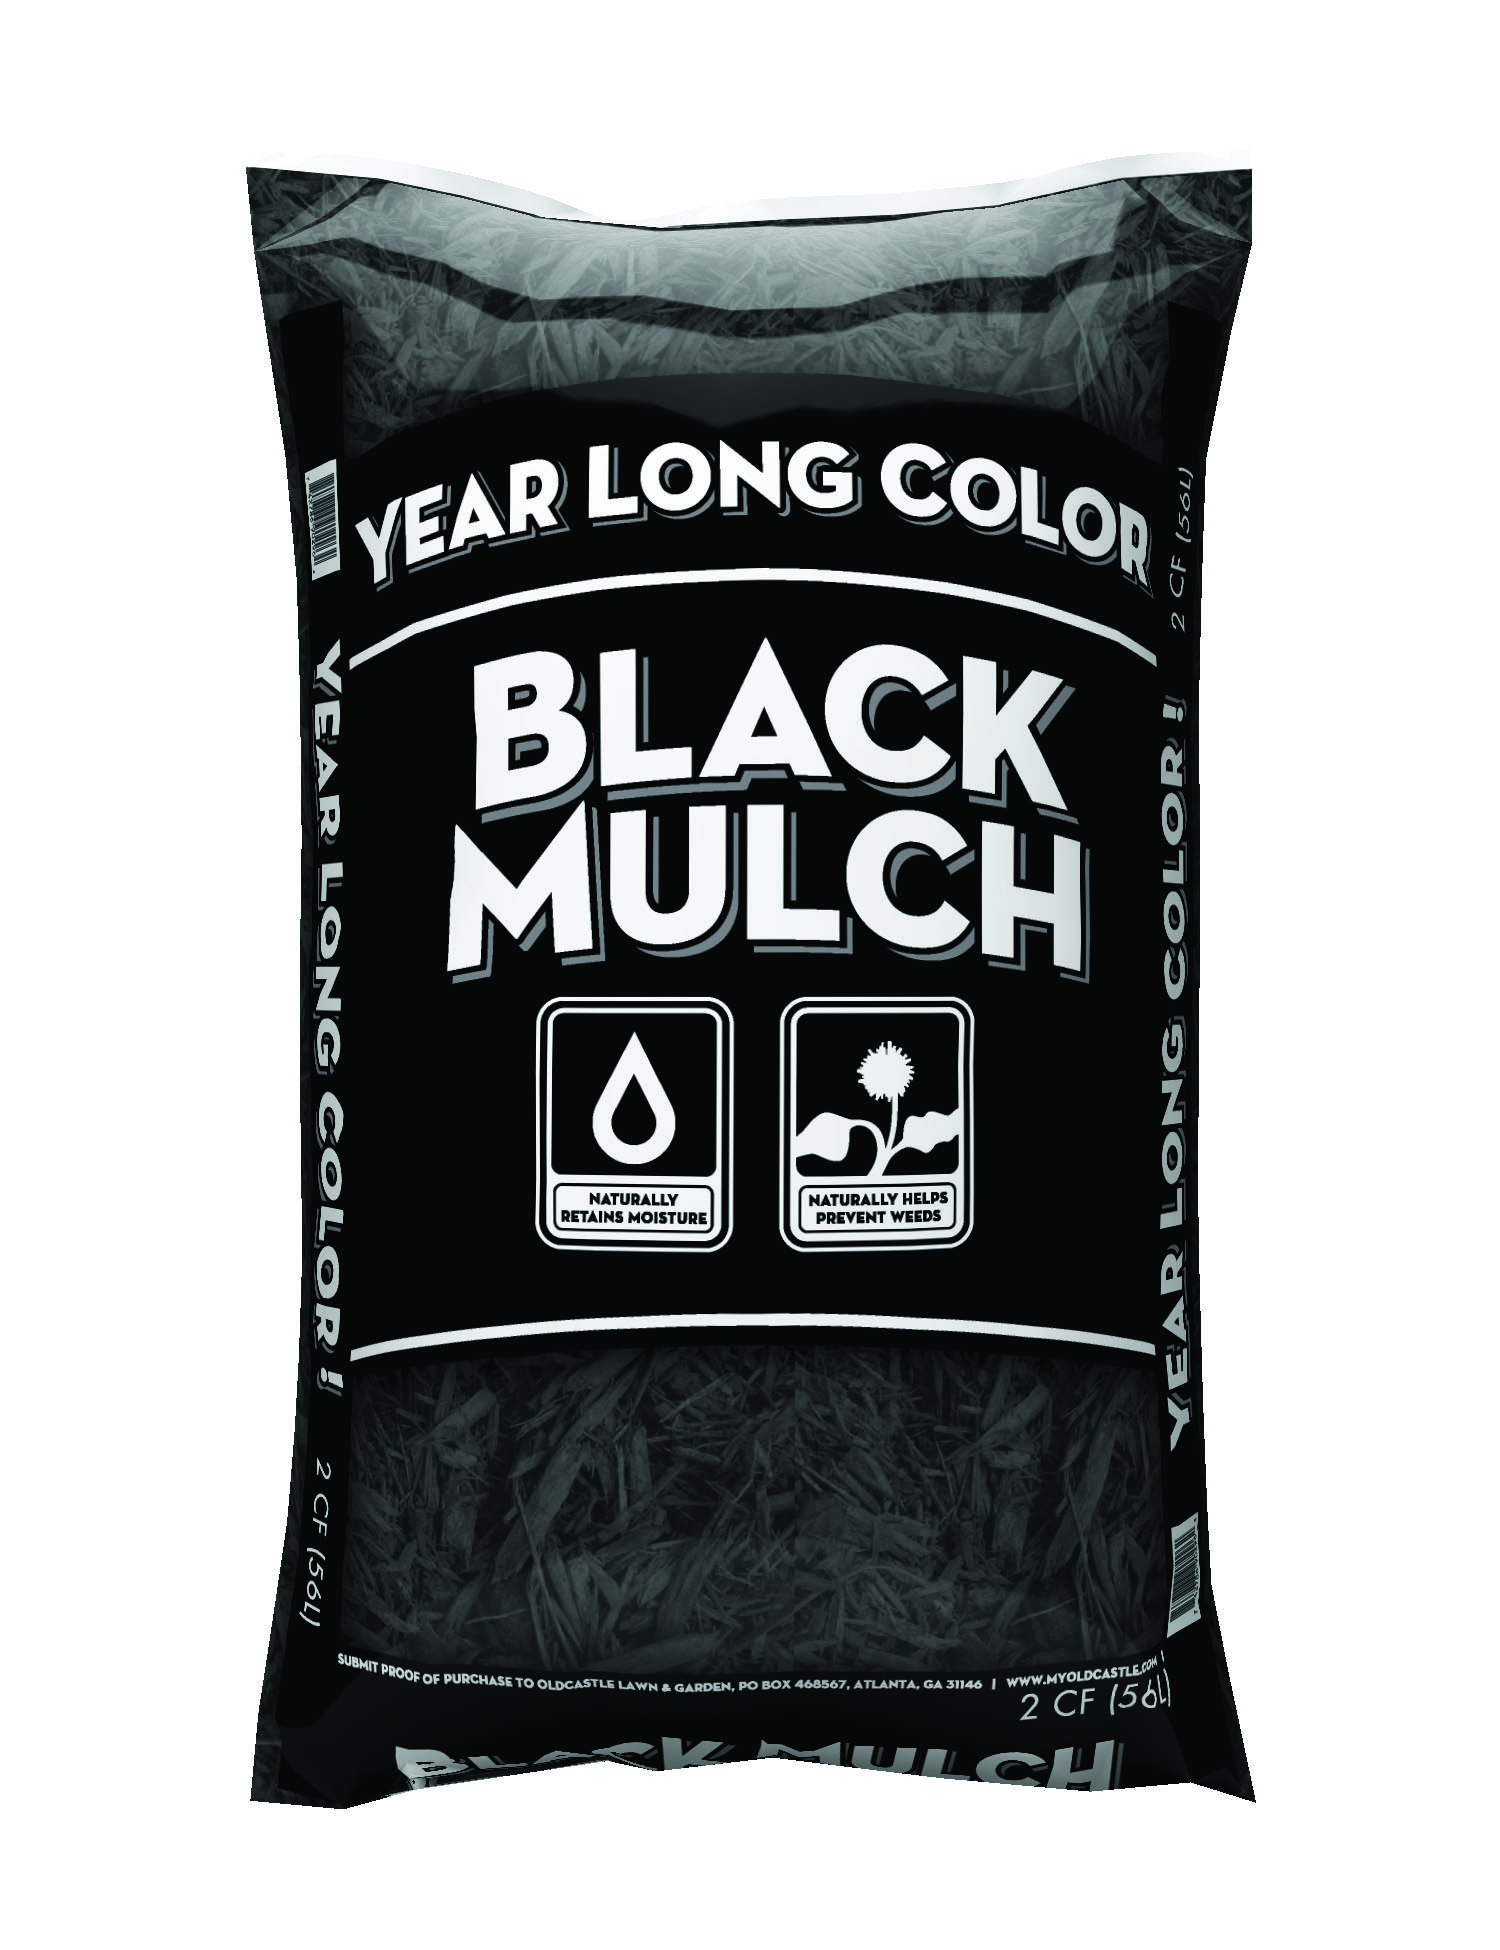 Walmart 2CF Year Long Brown/Black/Red Mulch $1.97 YMMV in store only